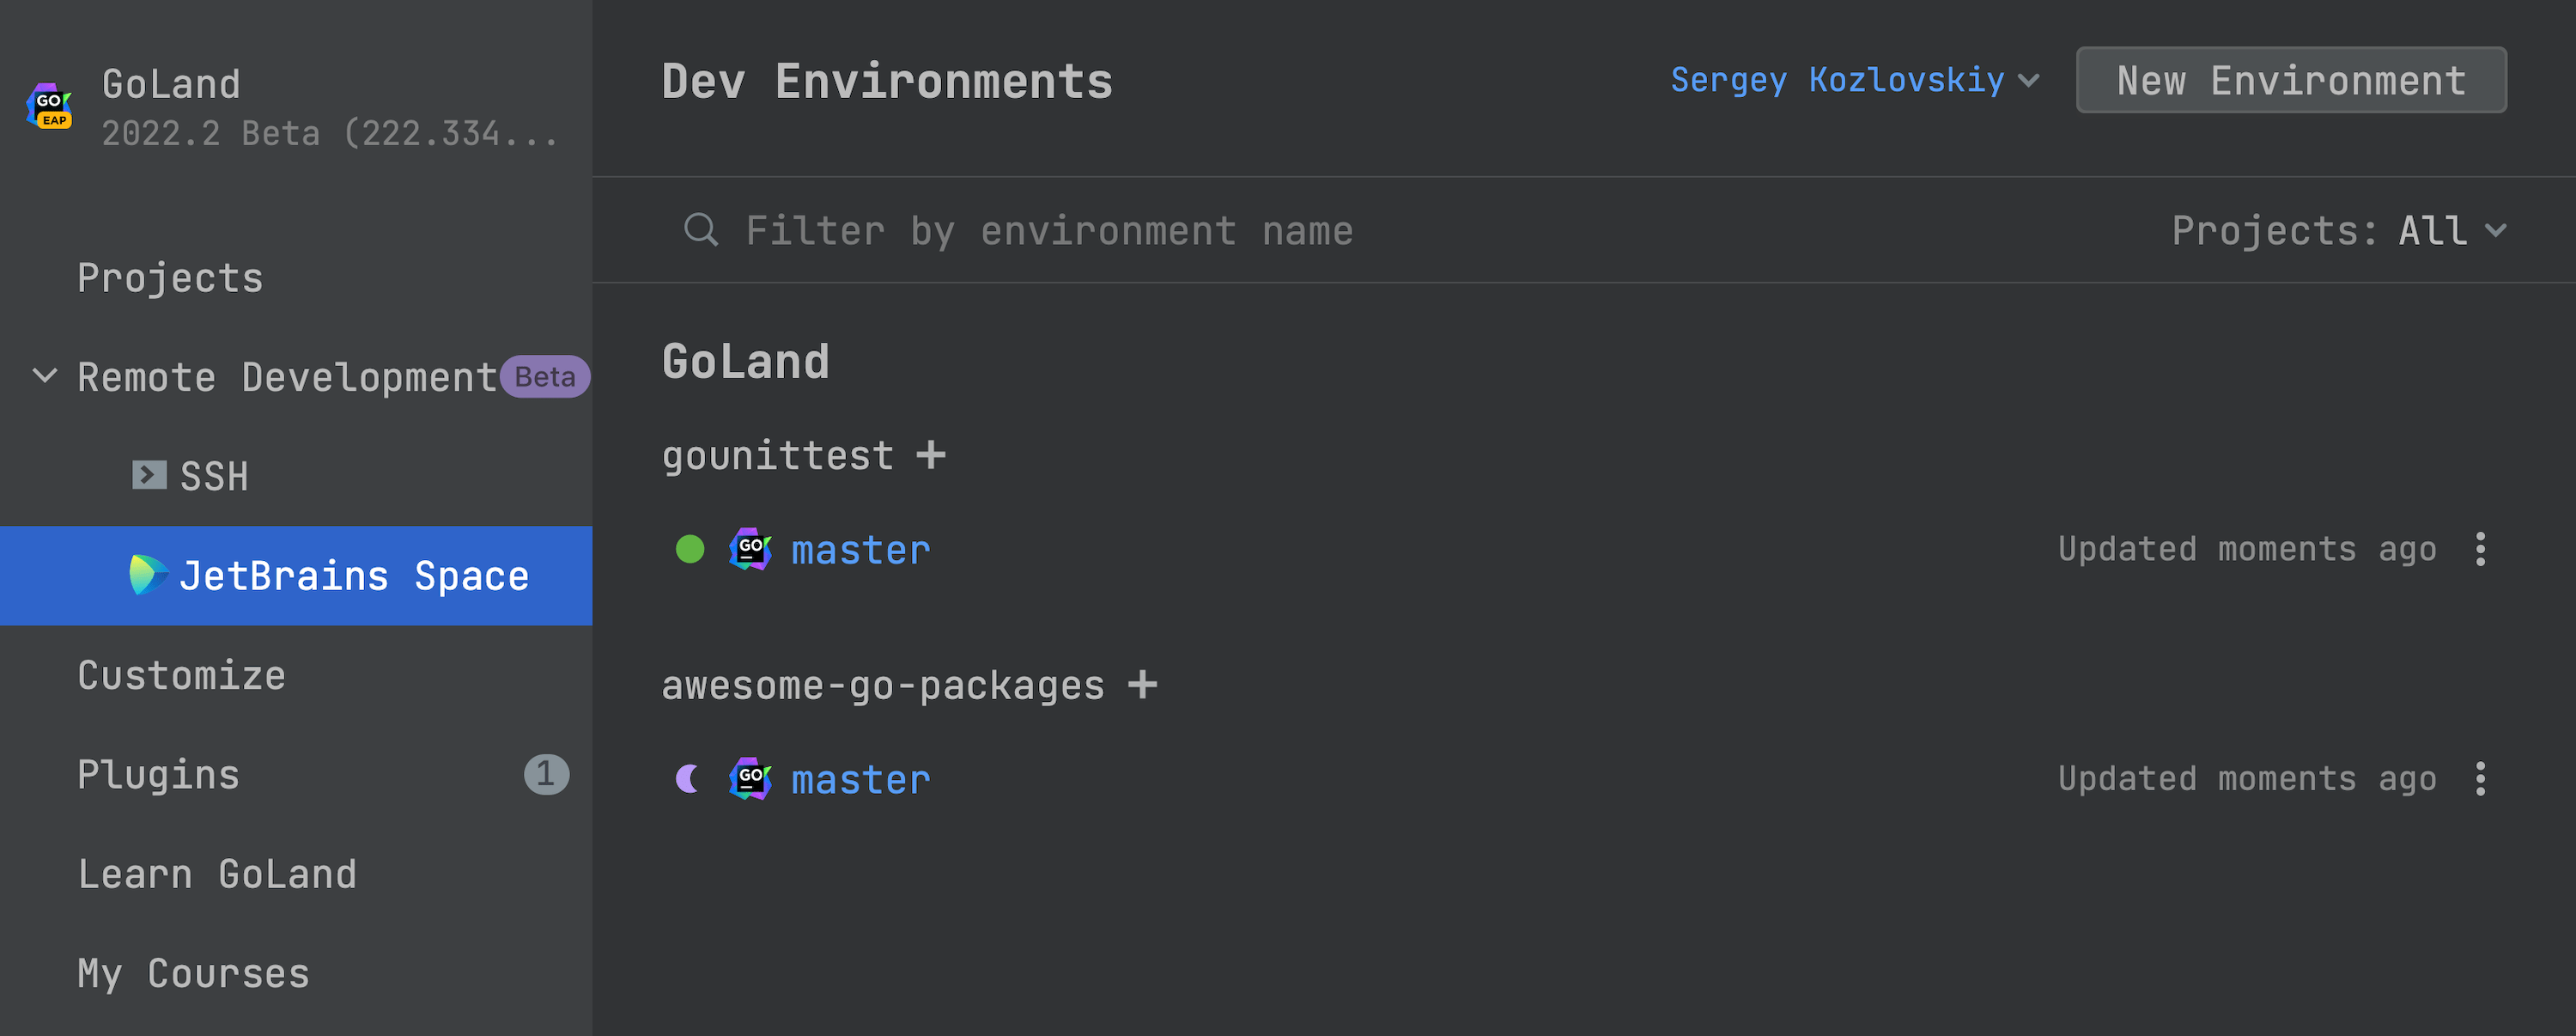 You can now manage your Space dev environments for remote development directly within GoLand